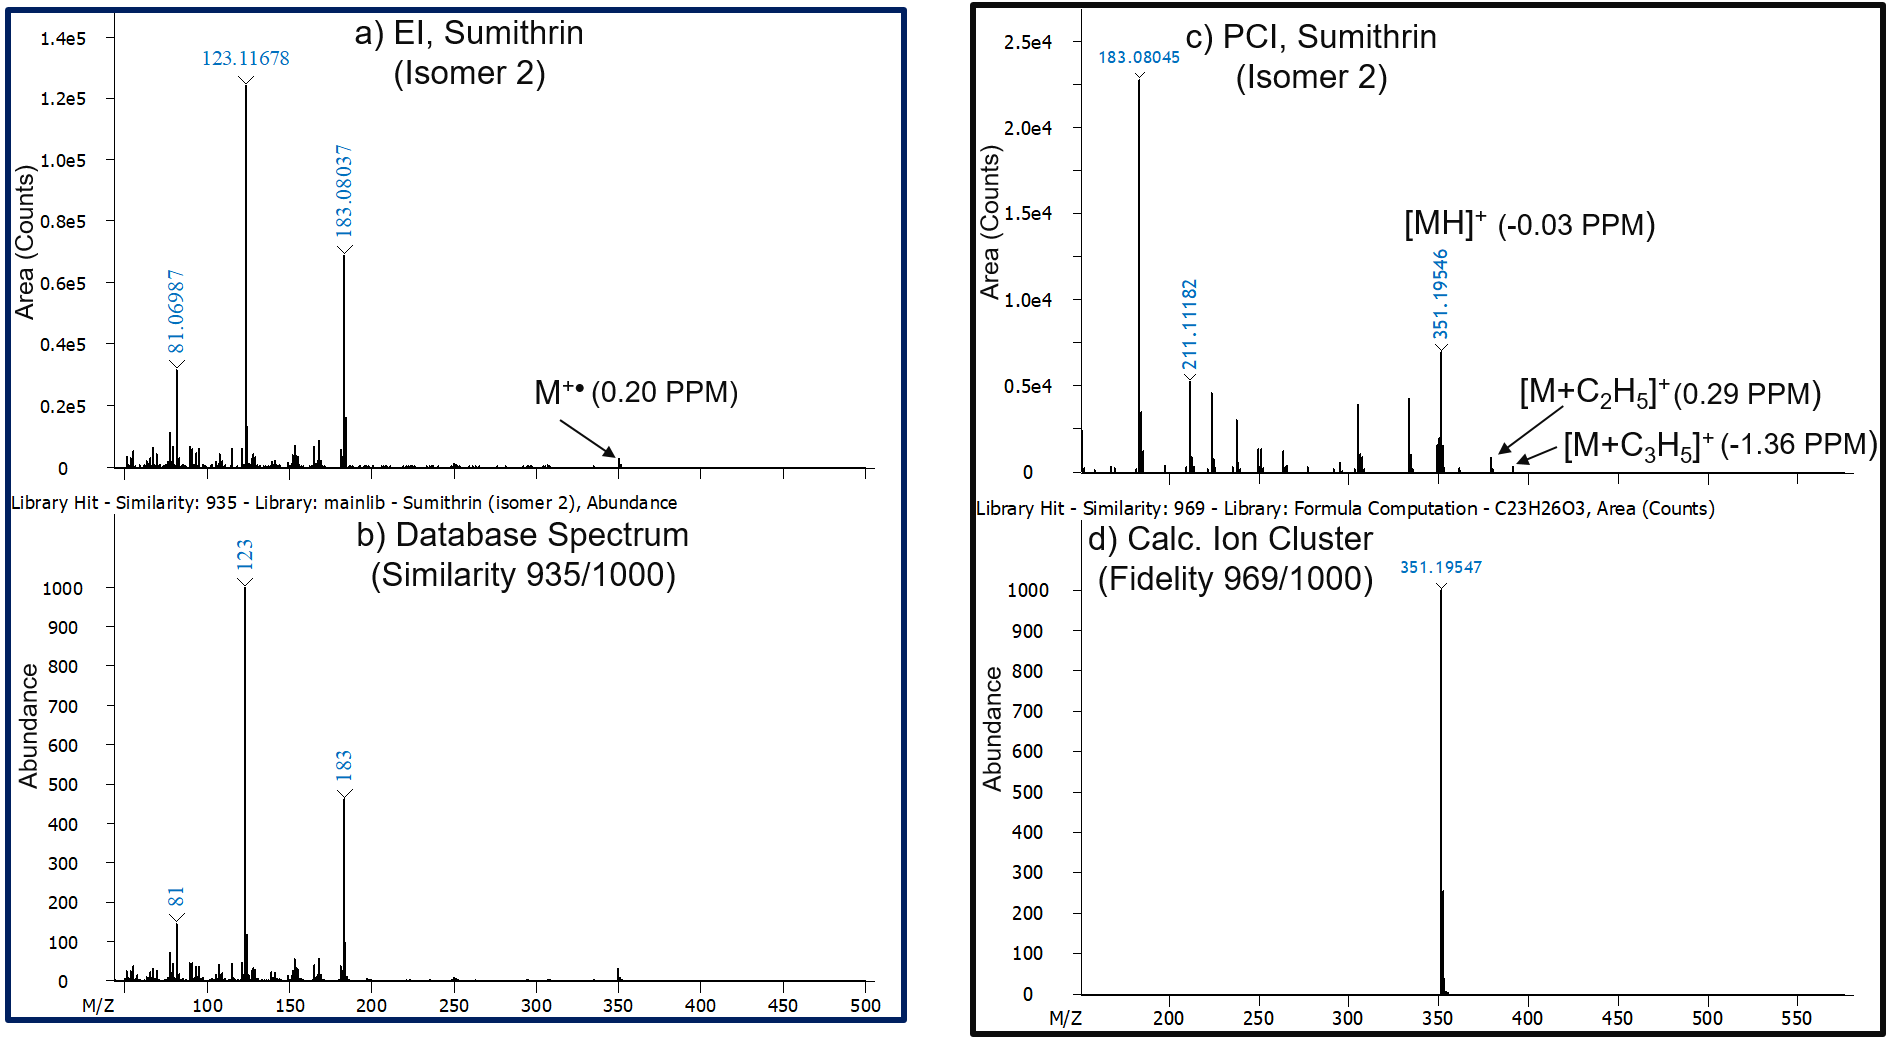 Figure 3: (a) Deconvoluted EI and (b) database mass spectra for sumithrin (isomer 2) (c) Deconvoluted PCI mass spectrum for sumithrin (isomer 2) and (d) Calculated PCI ion cluster and isotopic fidelity score for sumithrin (isomer 2).